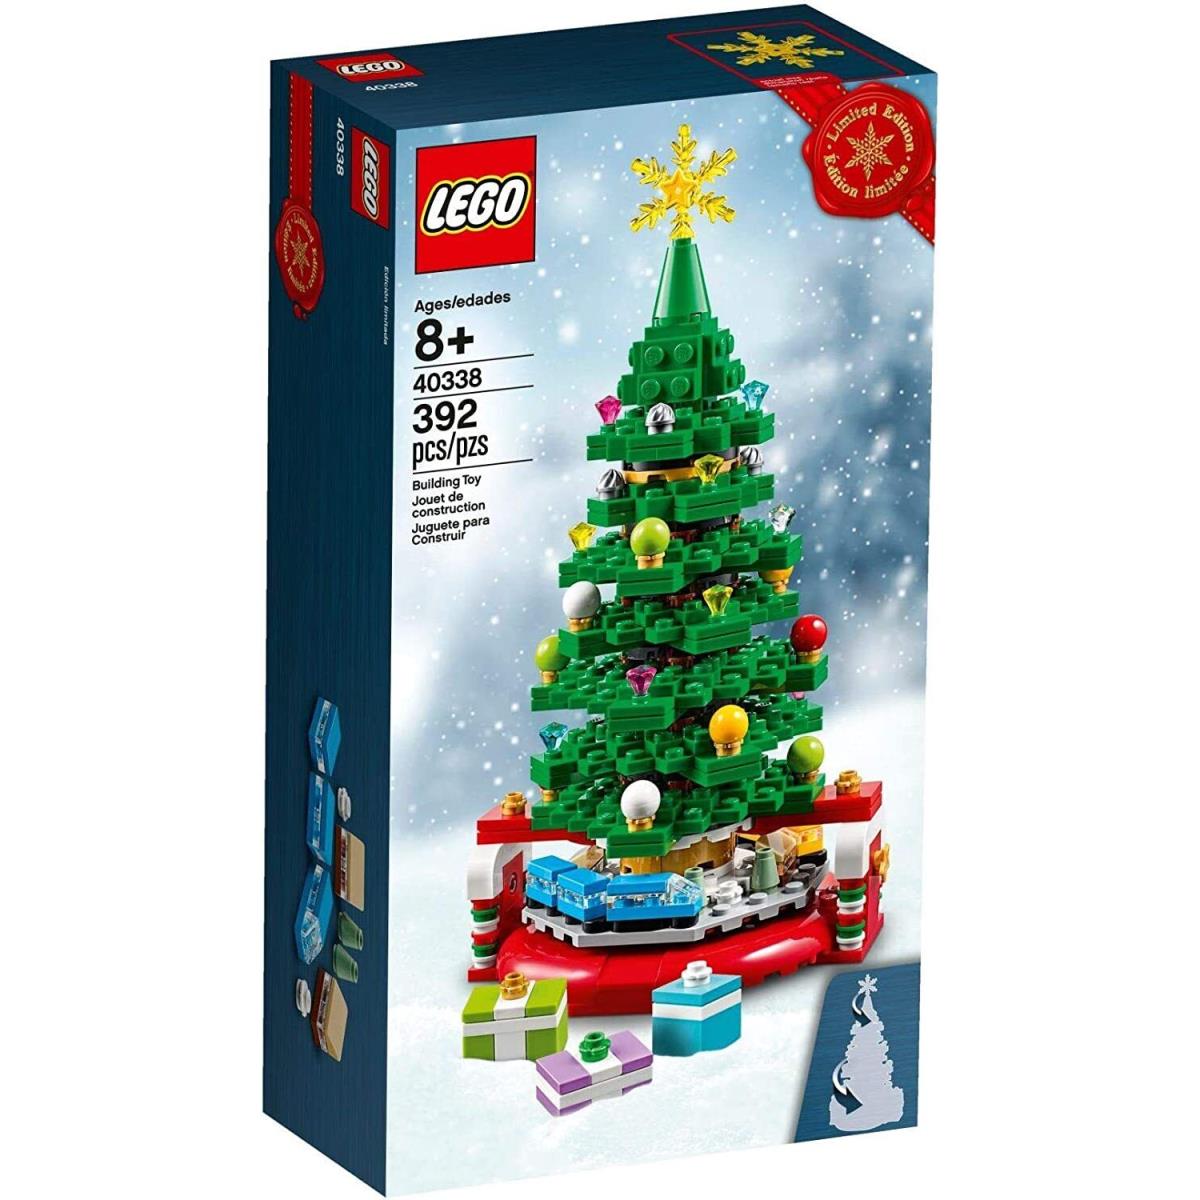 Lego Exclusive Set 40338 Holiday Christmas Tree 2019 Limited Edition